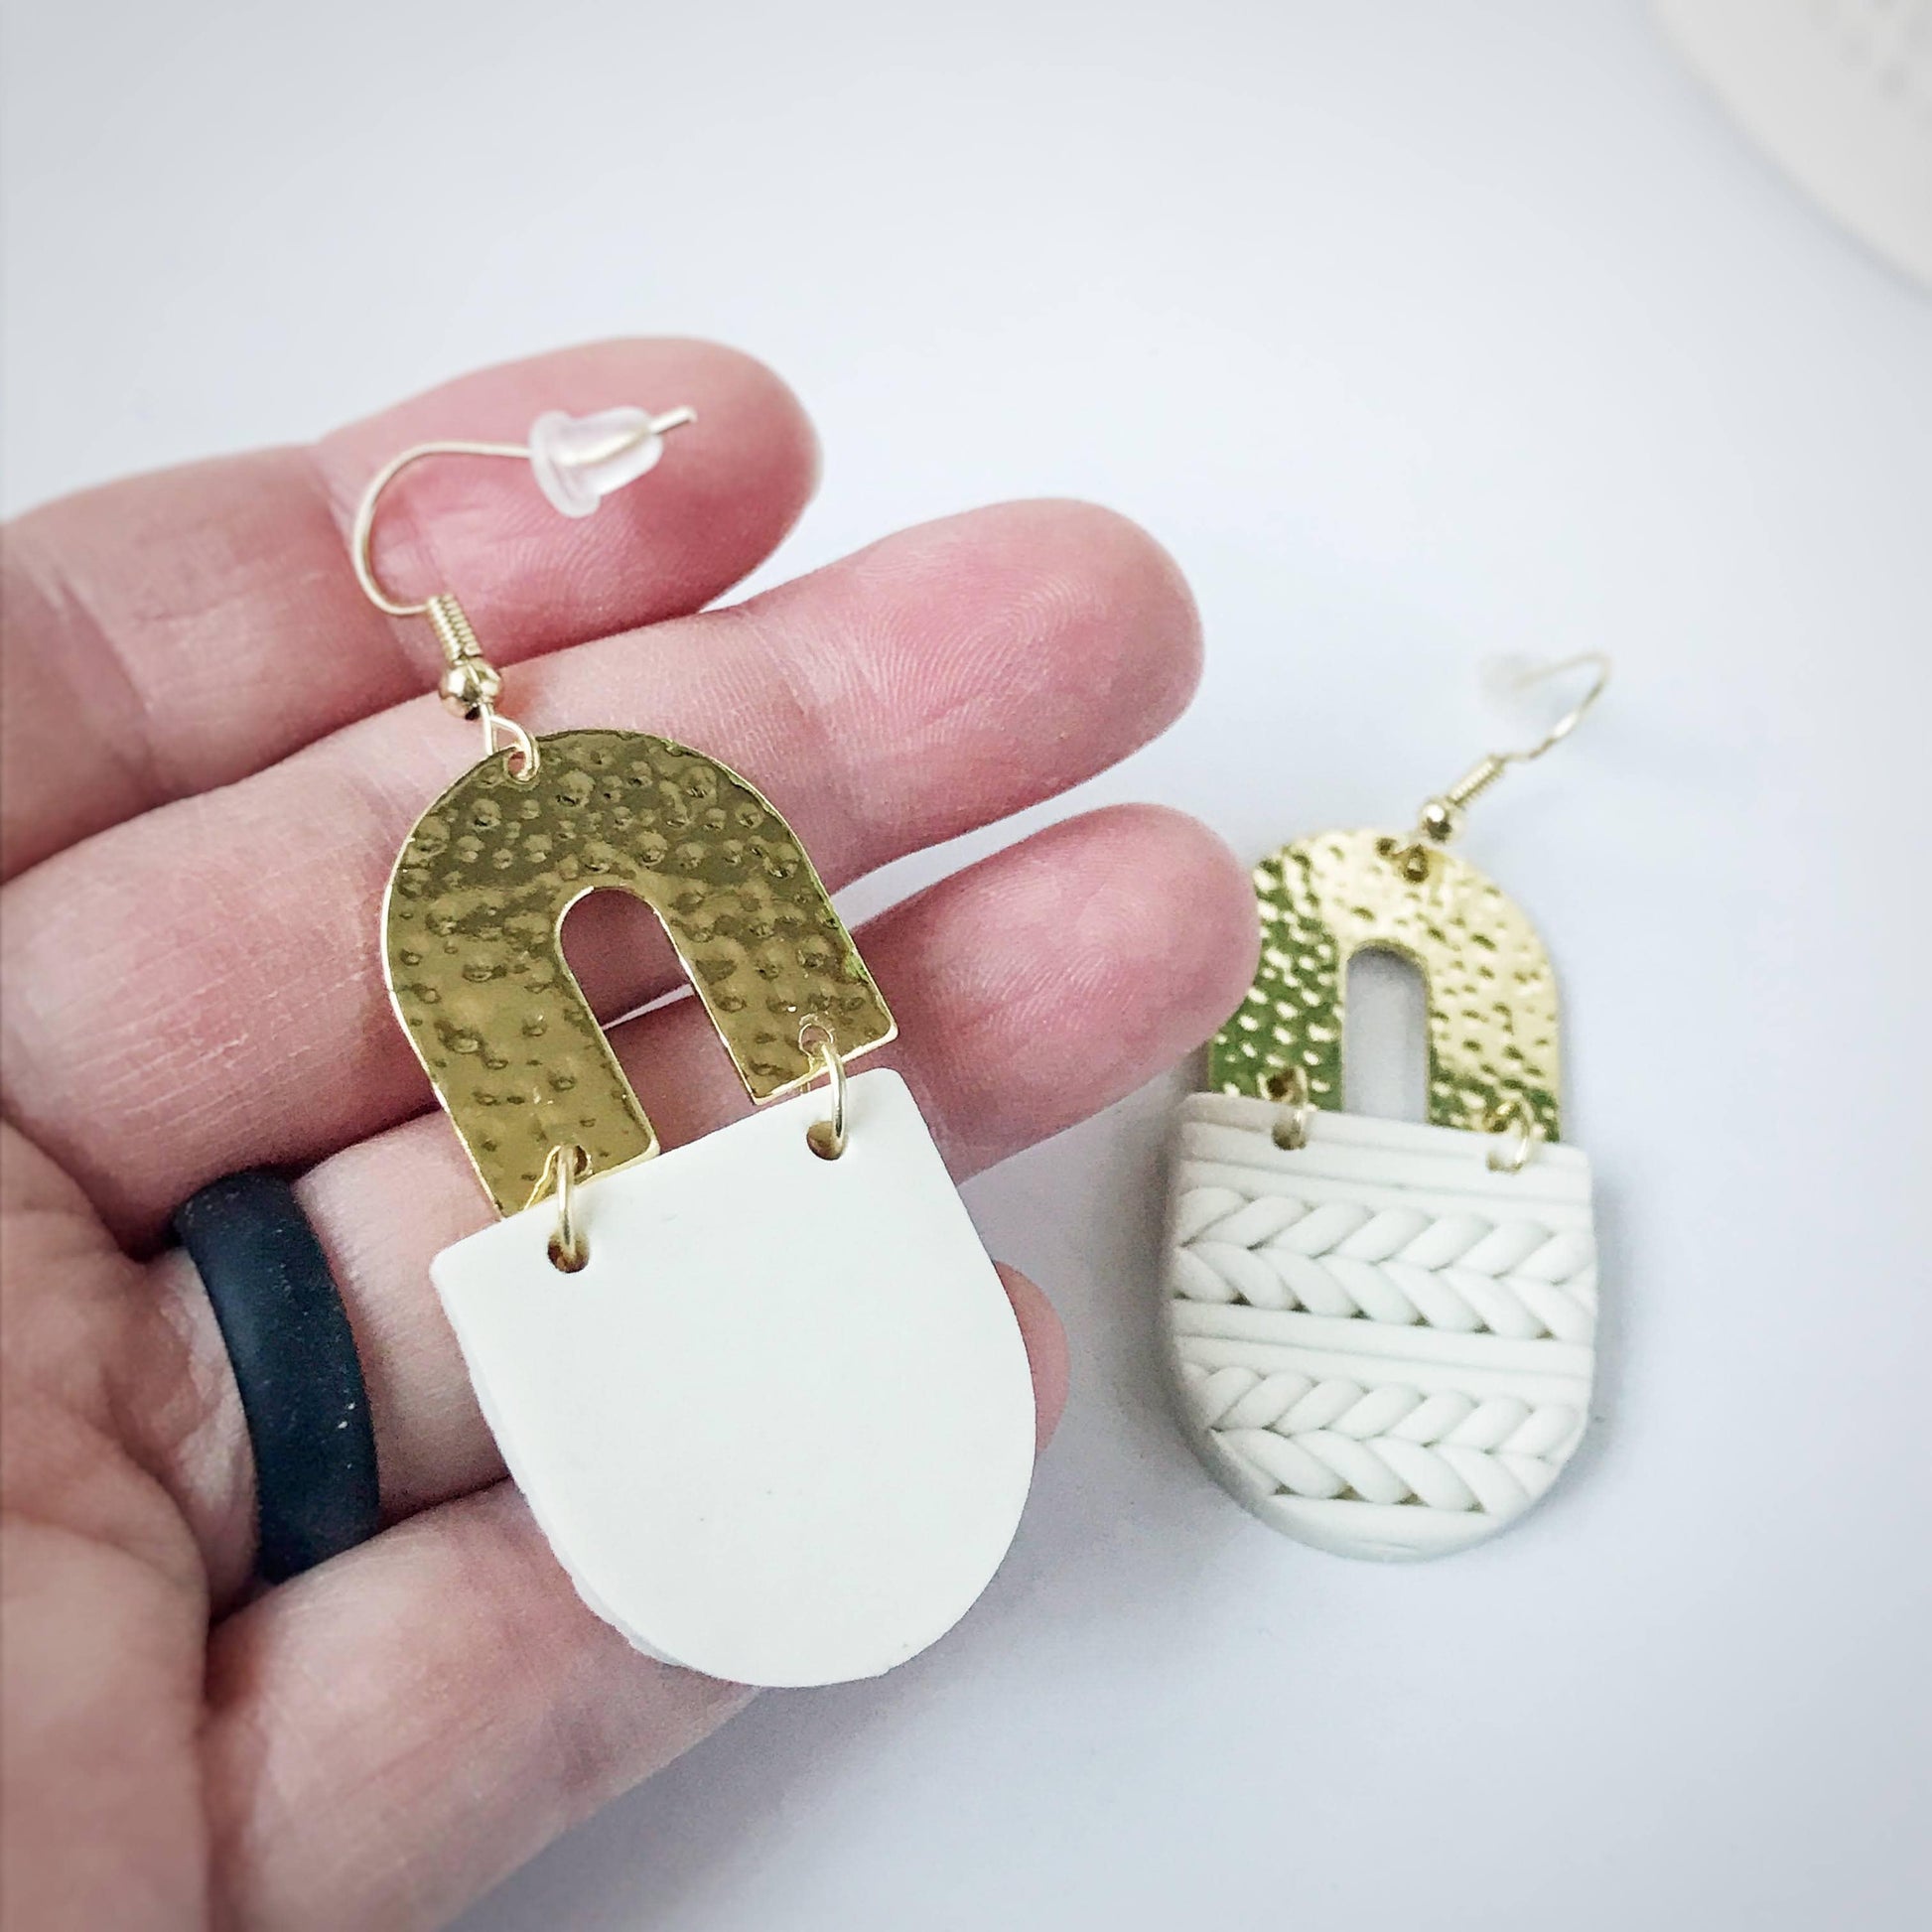 KellyMack.Co Earrings Kalena:: White Knit Textured Polymer Clay with Hammered Gold Arch Earrings